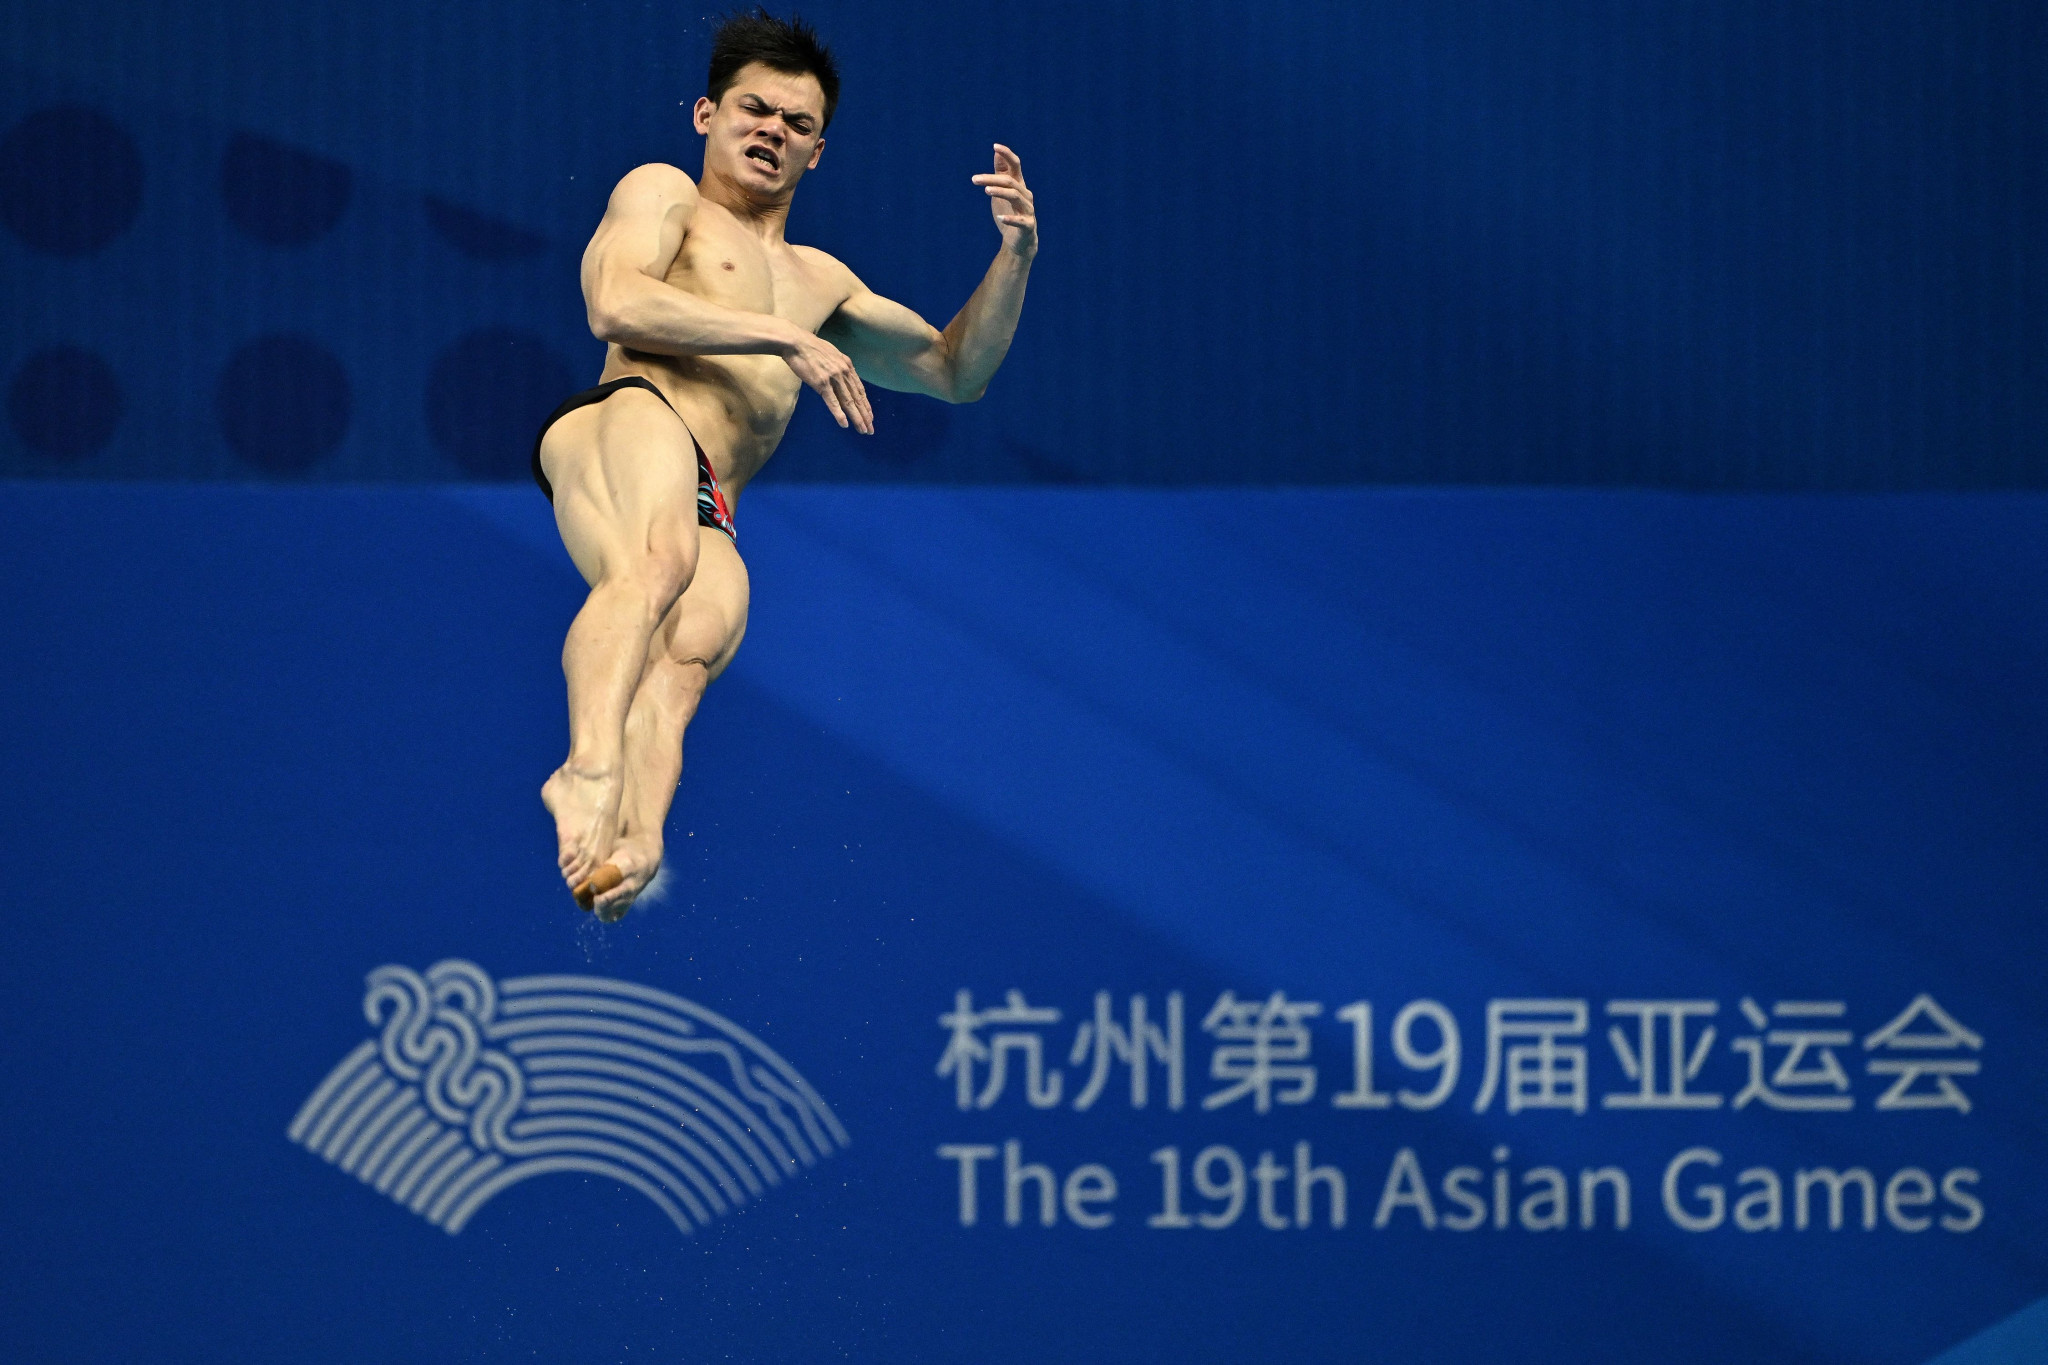 China's Wang Zongyuan dominated the men's 1m springboard diving final by leading from start to finish for the gold medal ©Getty Images